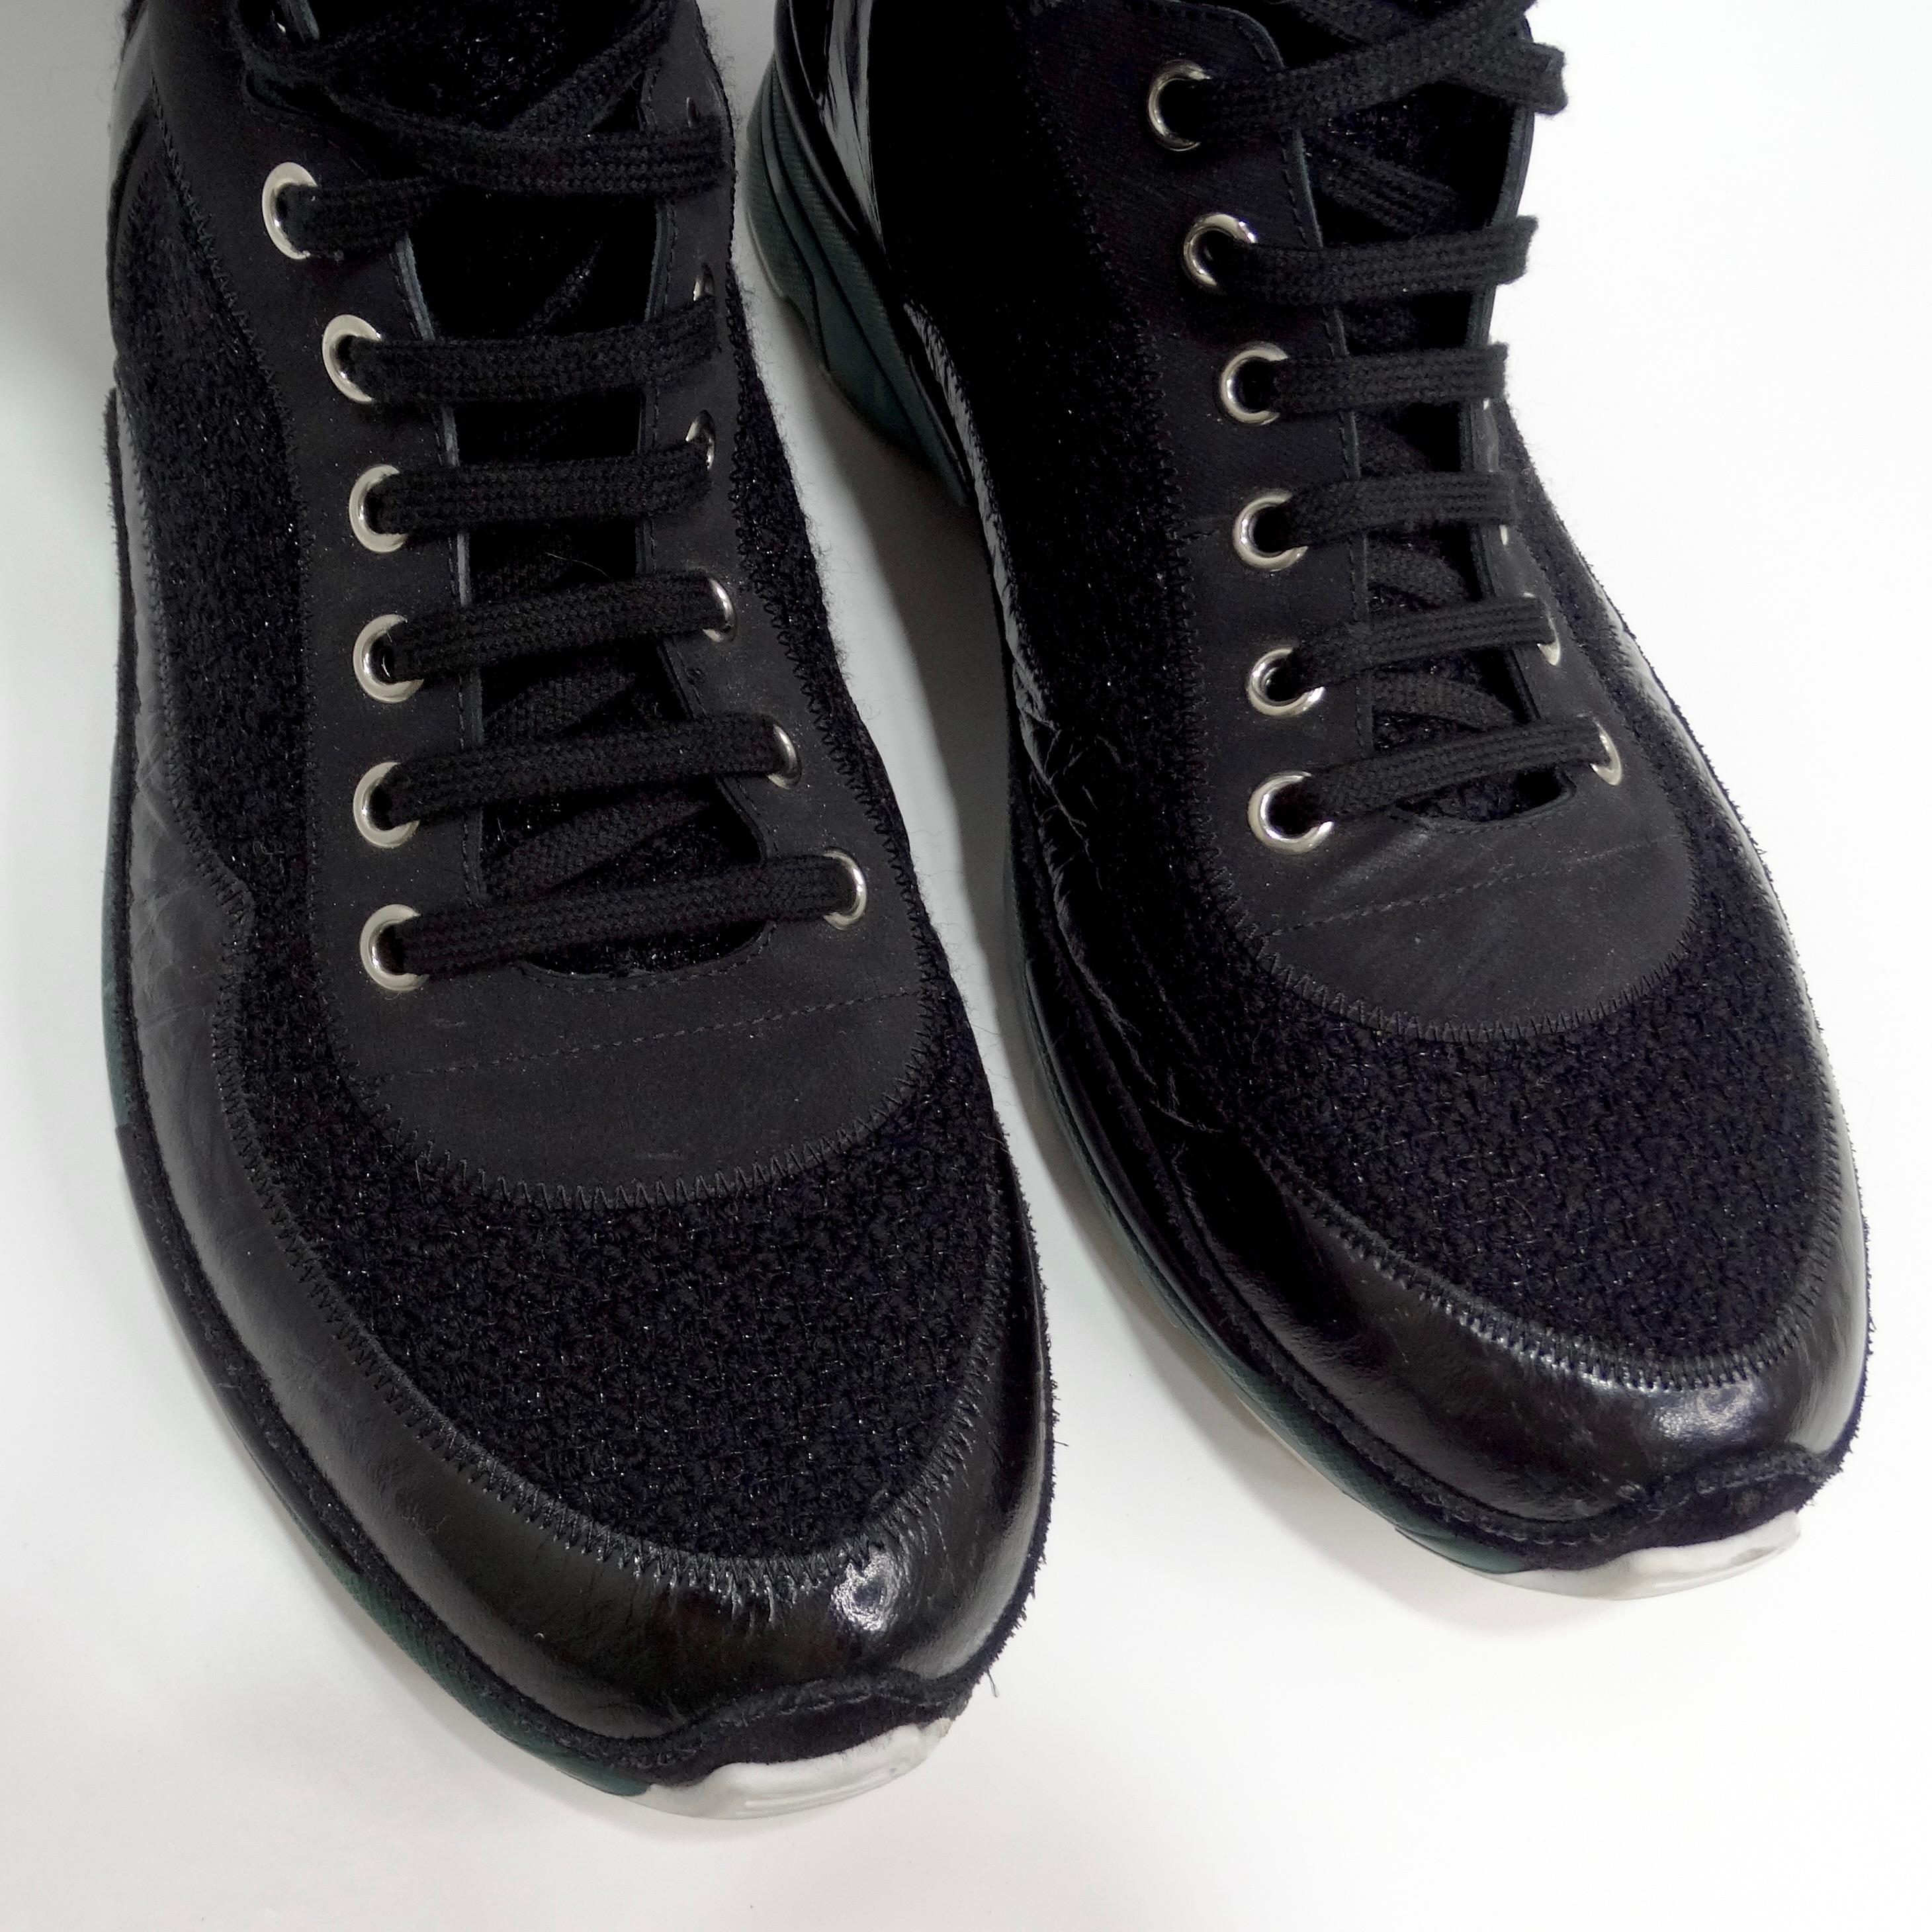 Women's or Men's Chanel Fall 2014 Patent Calfskin Tweed Sneaker Boot For Sale